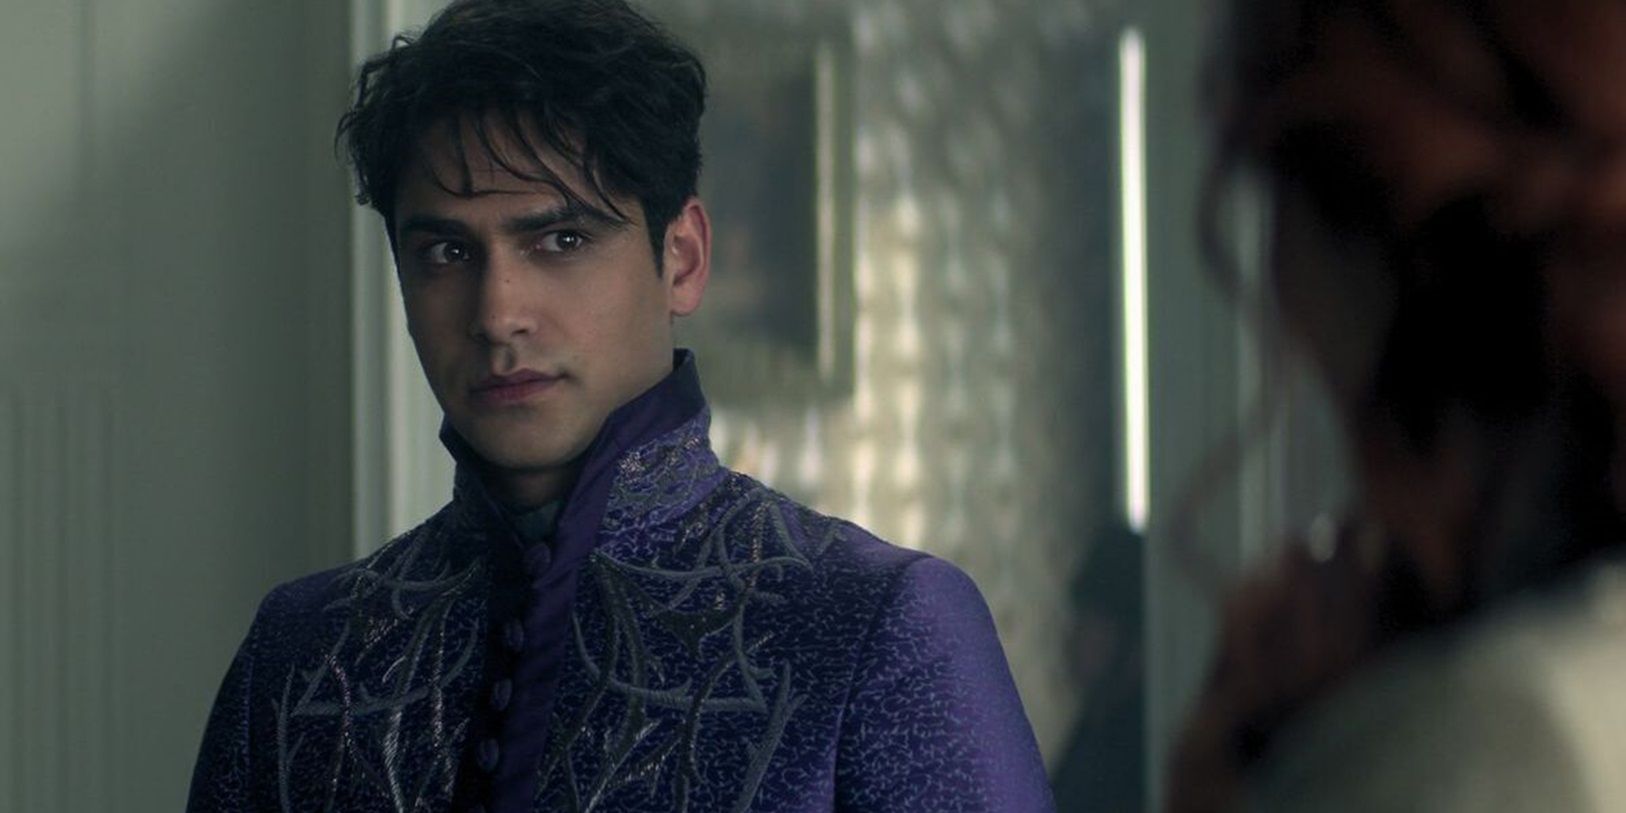 David looking serious in Shadow and Bone